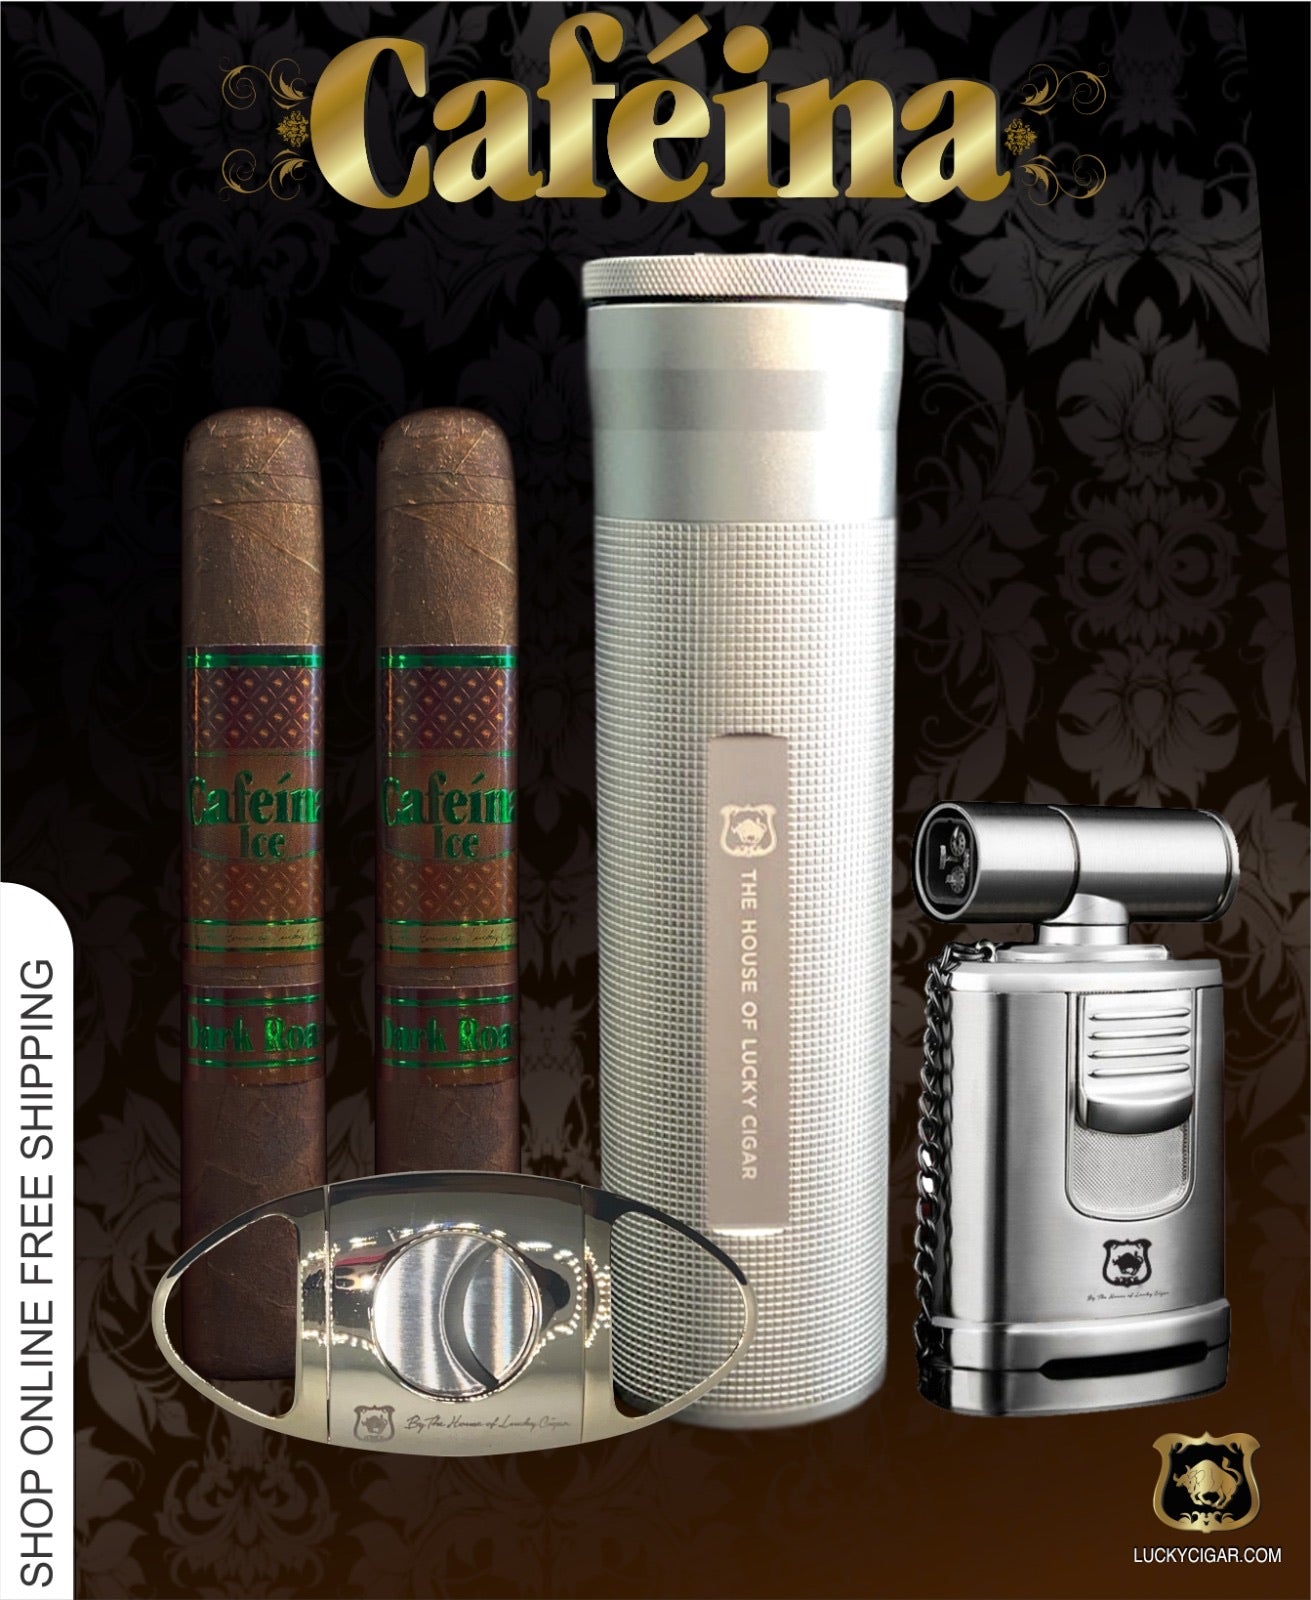 Infused Cigars: Set of 2 Cafeina Ice Dark Roast 6x52 Cigars with Humidor, Cutter, Torch